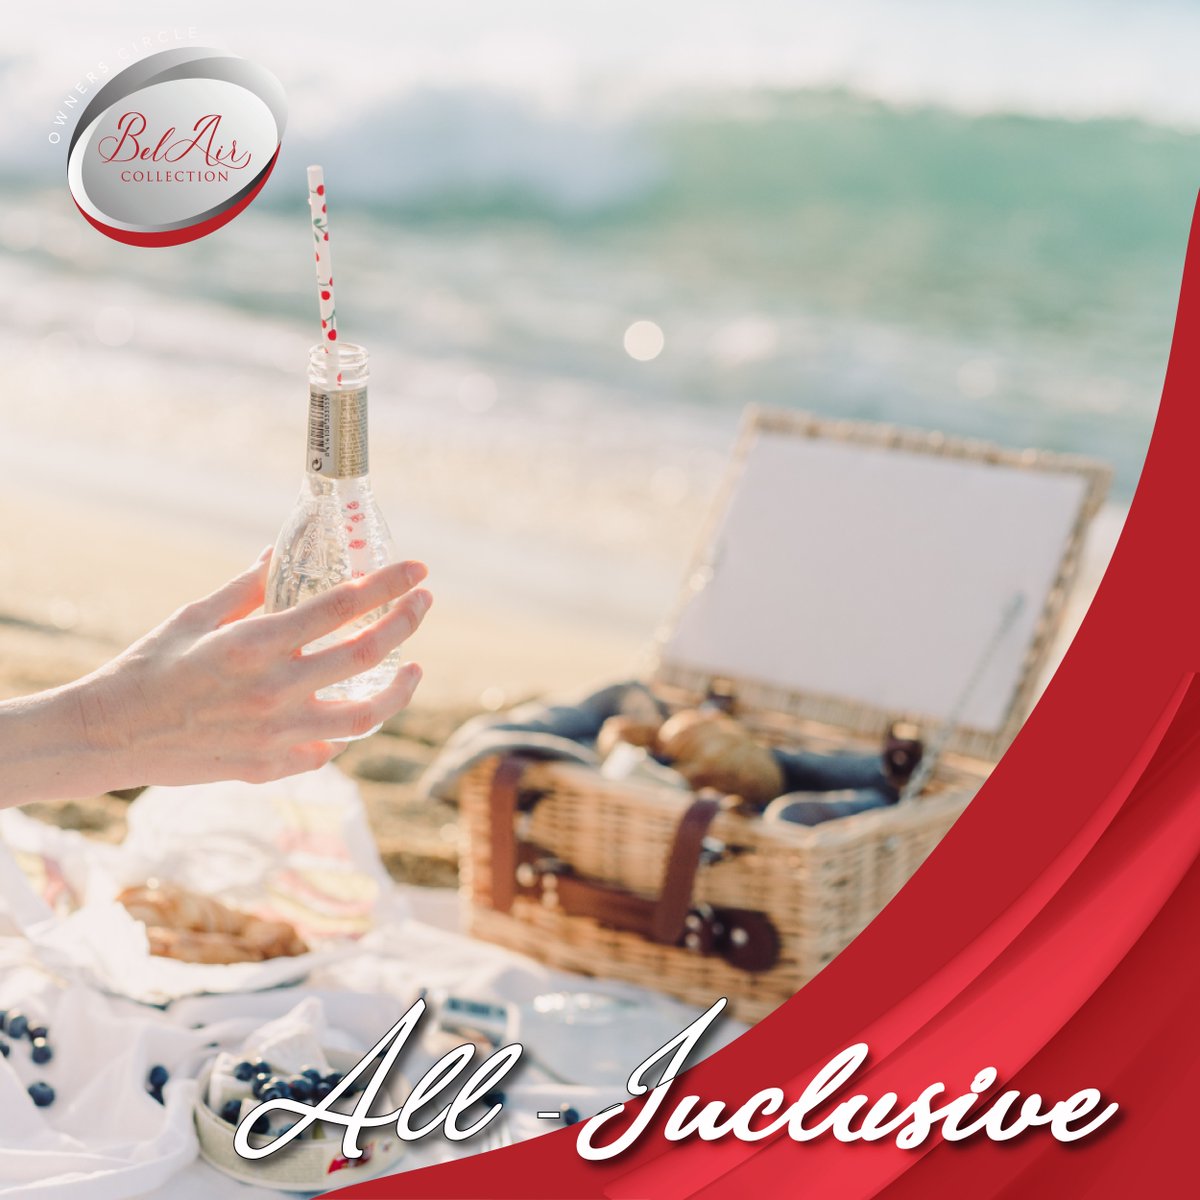 If you are going to book your next vacation, have the complete experience. Request our All Inclusive service (exclusive for KRYSTAL GRAND VALLARTA AND LOS CABOS). See more information at:  belairownerscircle.com/promotions.html #allinclusive #KrystalGrand #NuevoVallarta #Cancun #LosCabos